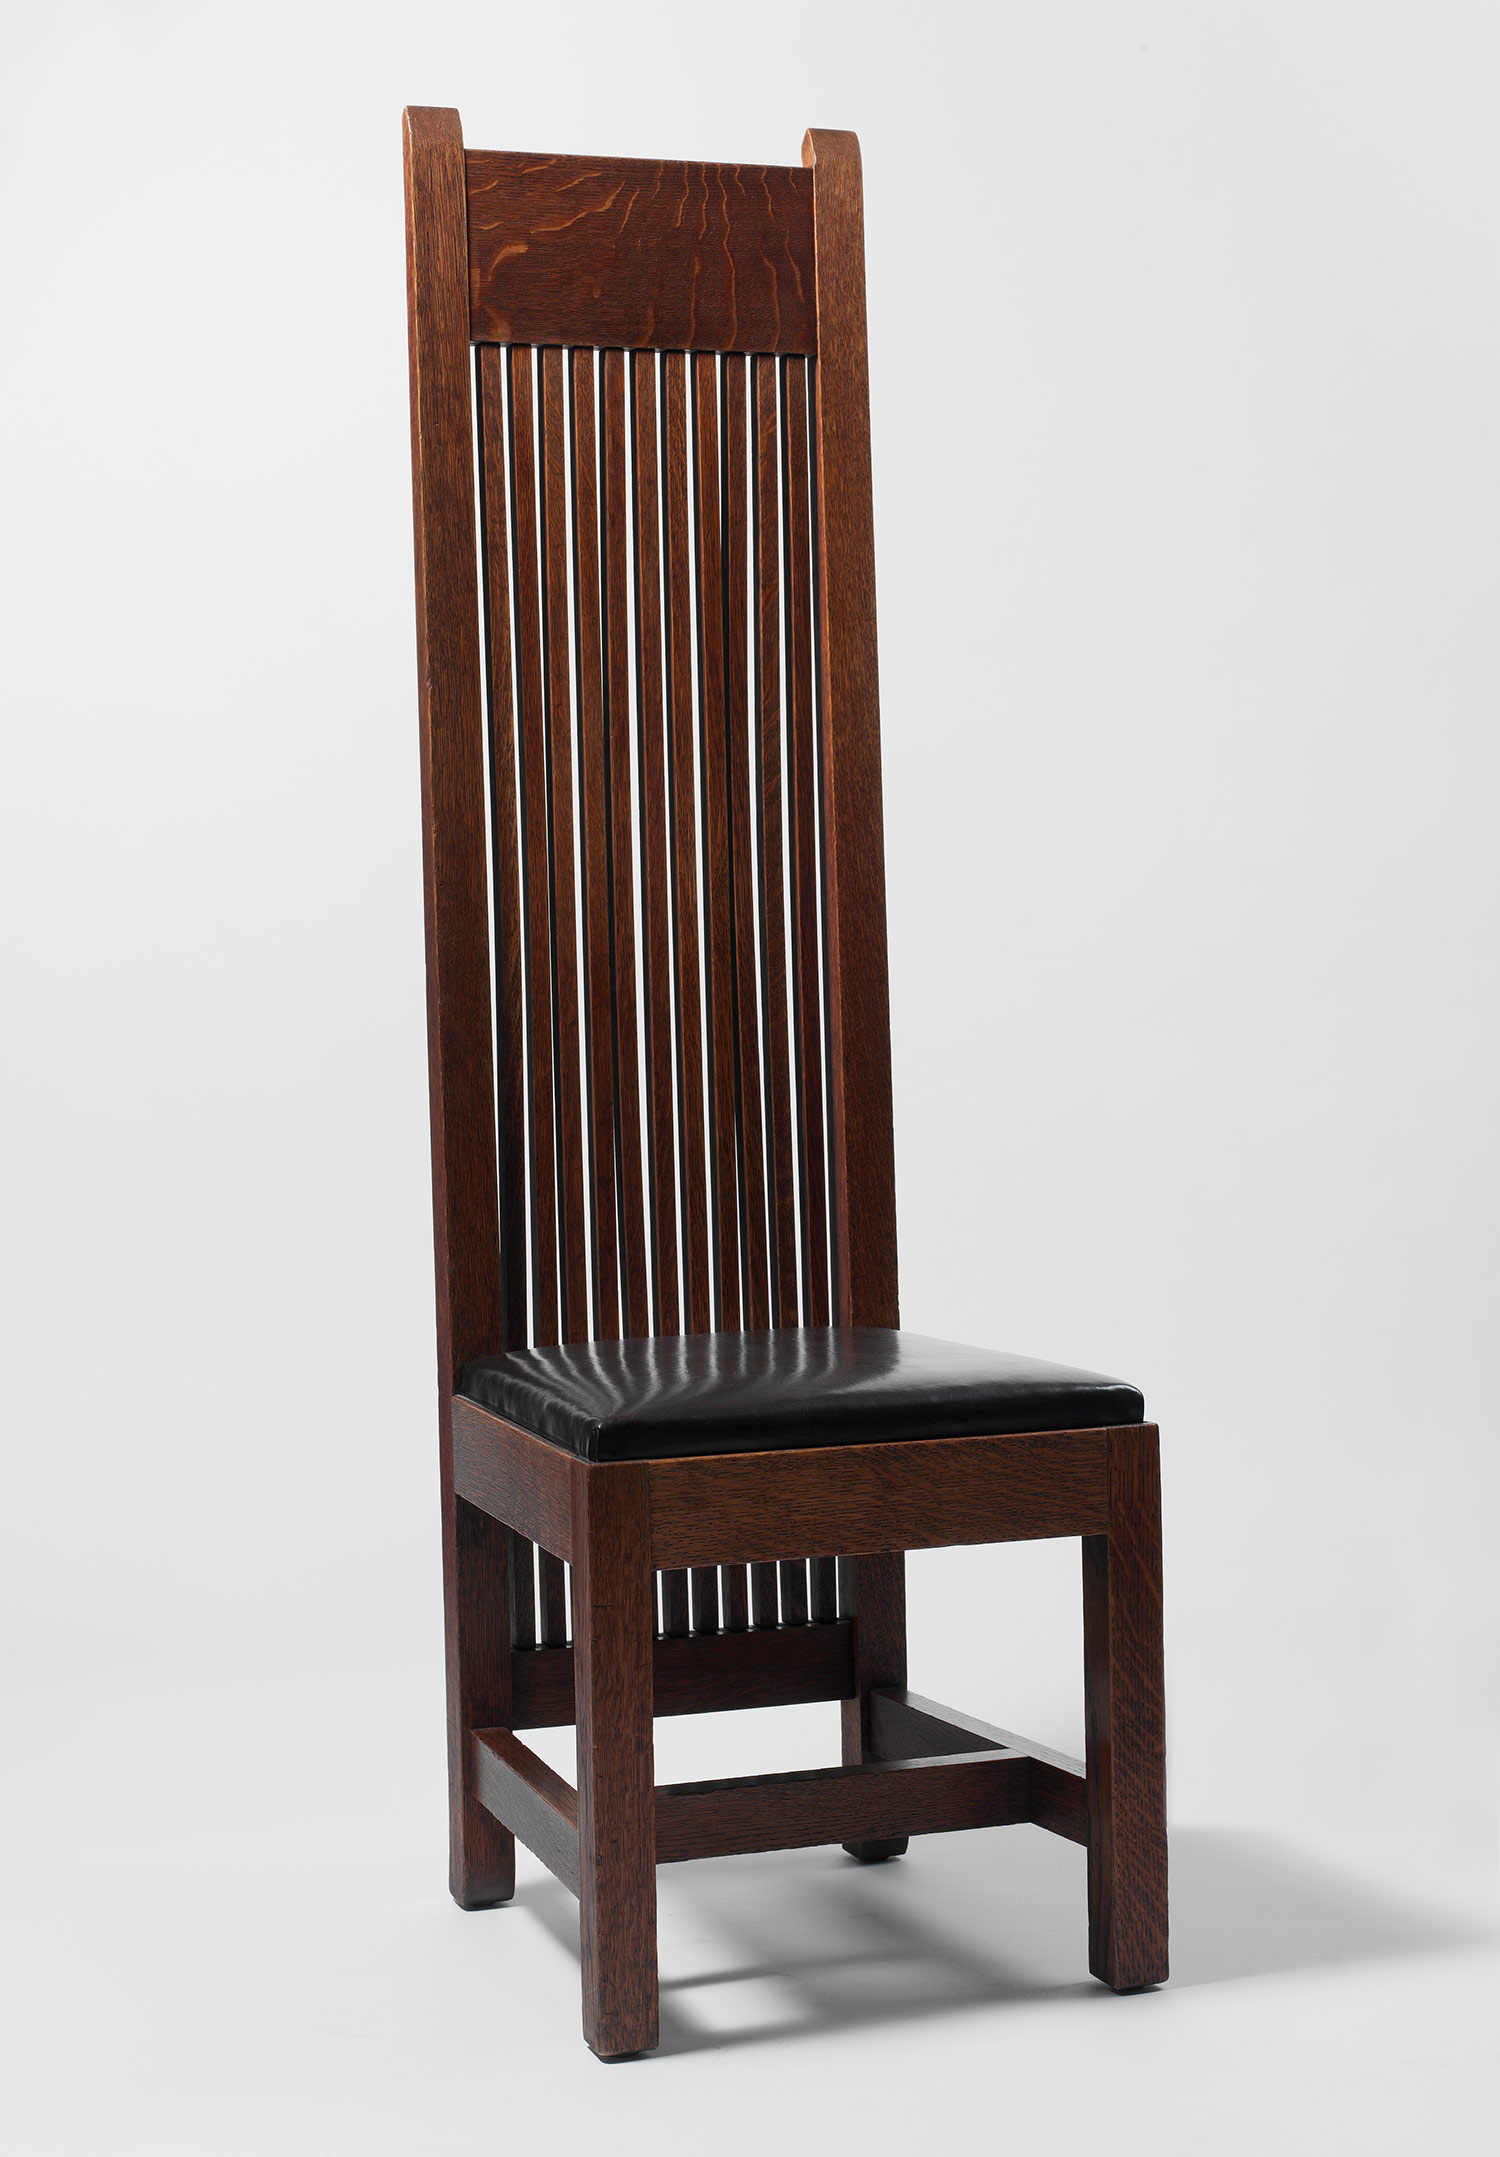 Side chair, 1901–2. Made by Frank Lloyd Wright (American, 1867–1959)